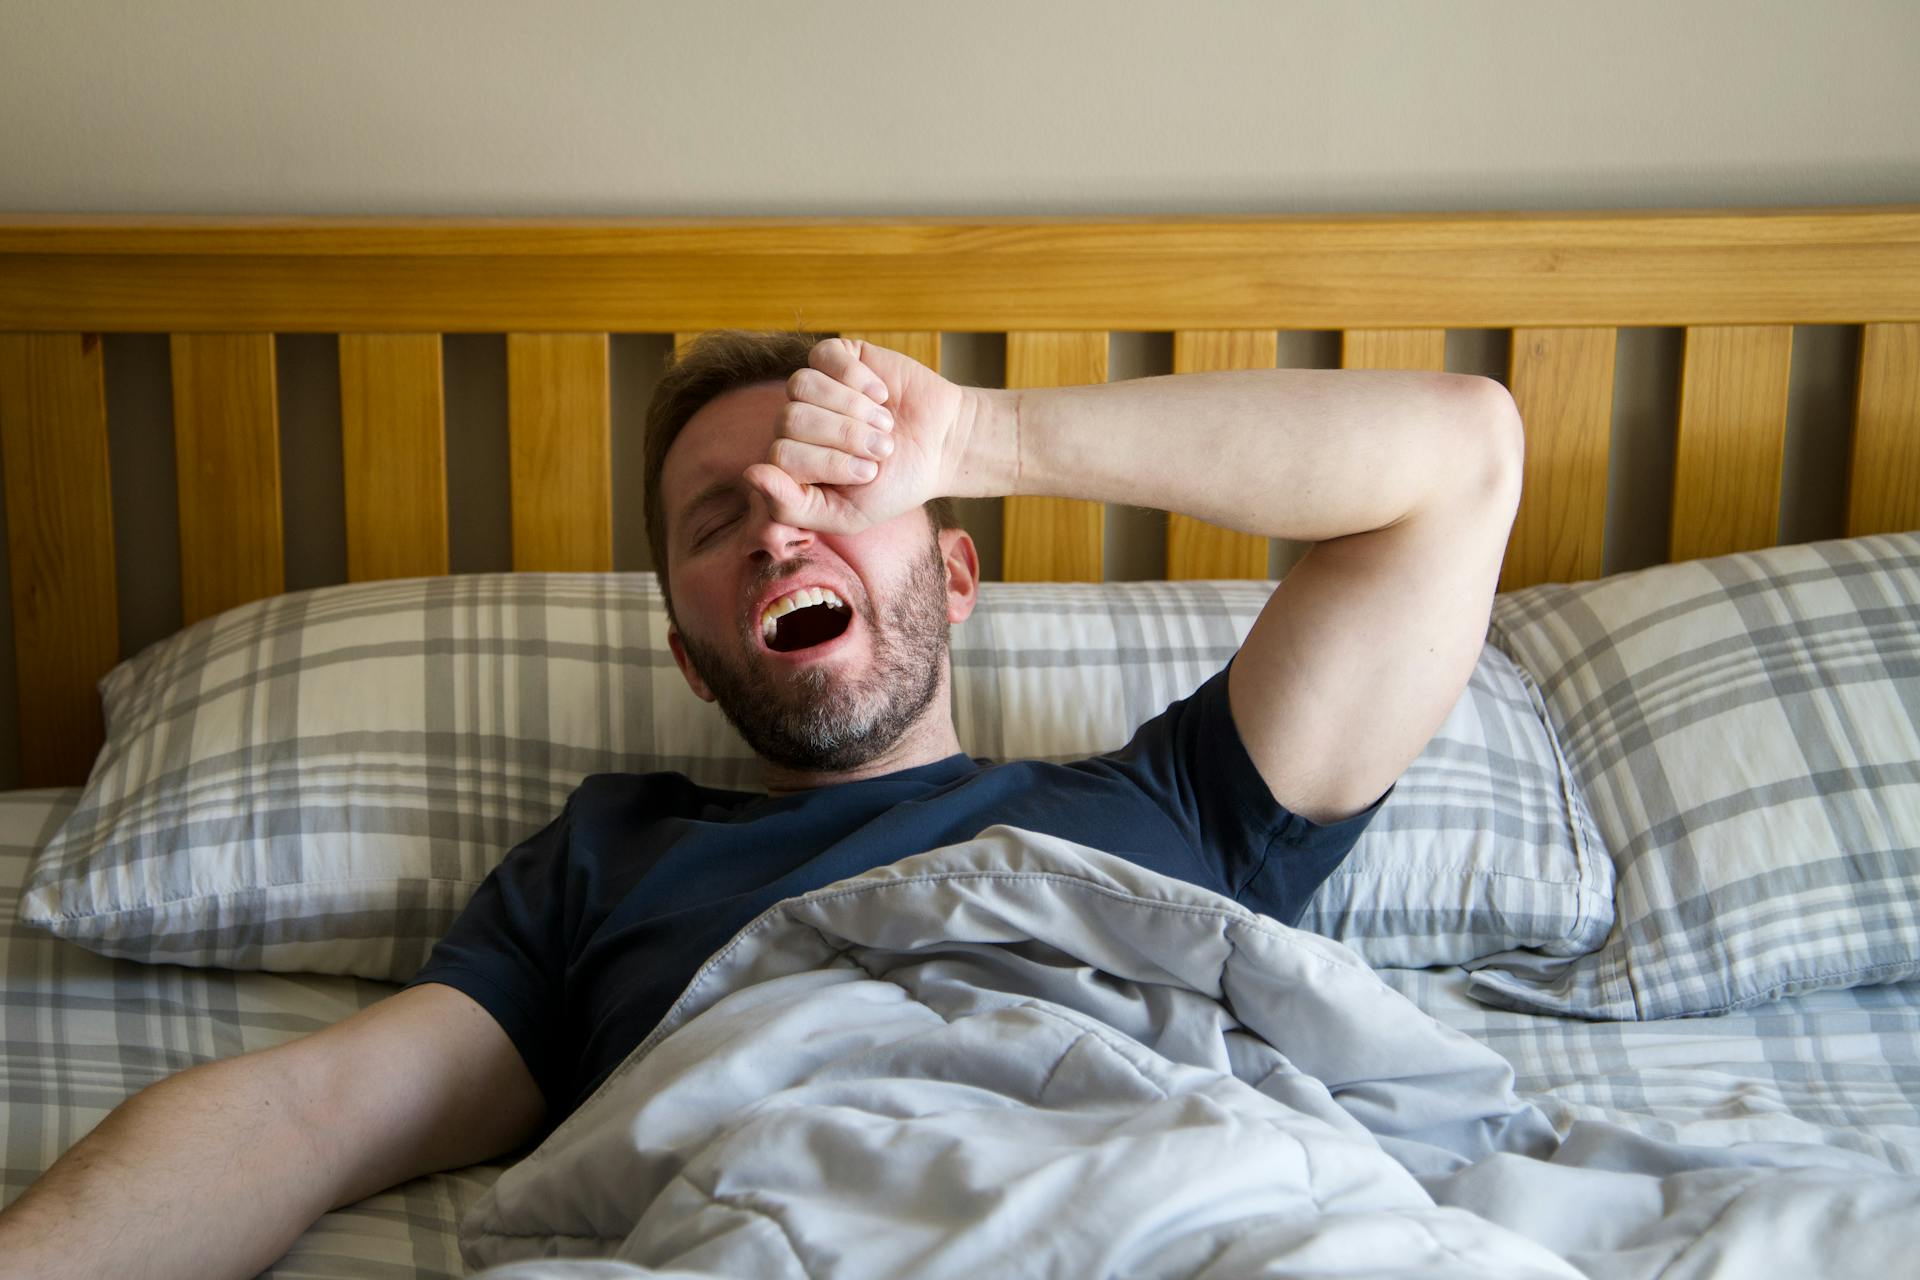 A man yawning and groggily rubbing his eyes | Source: Pexels